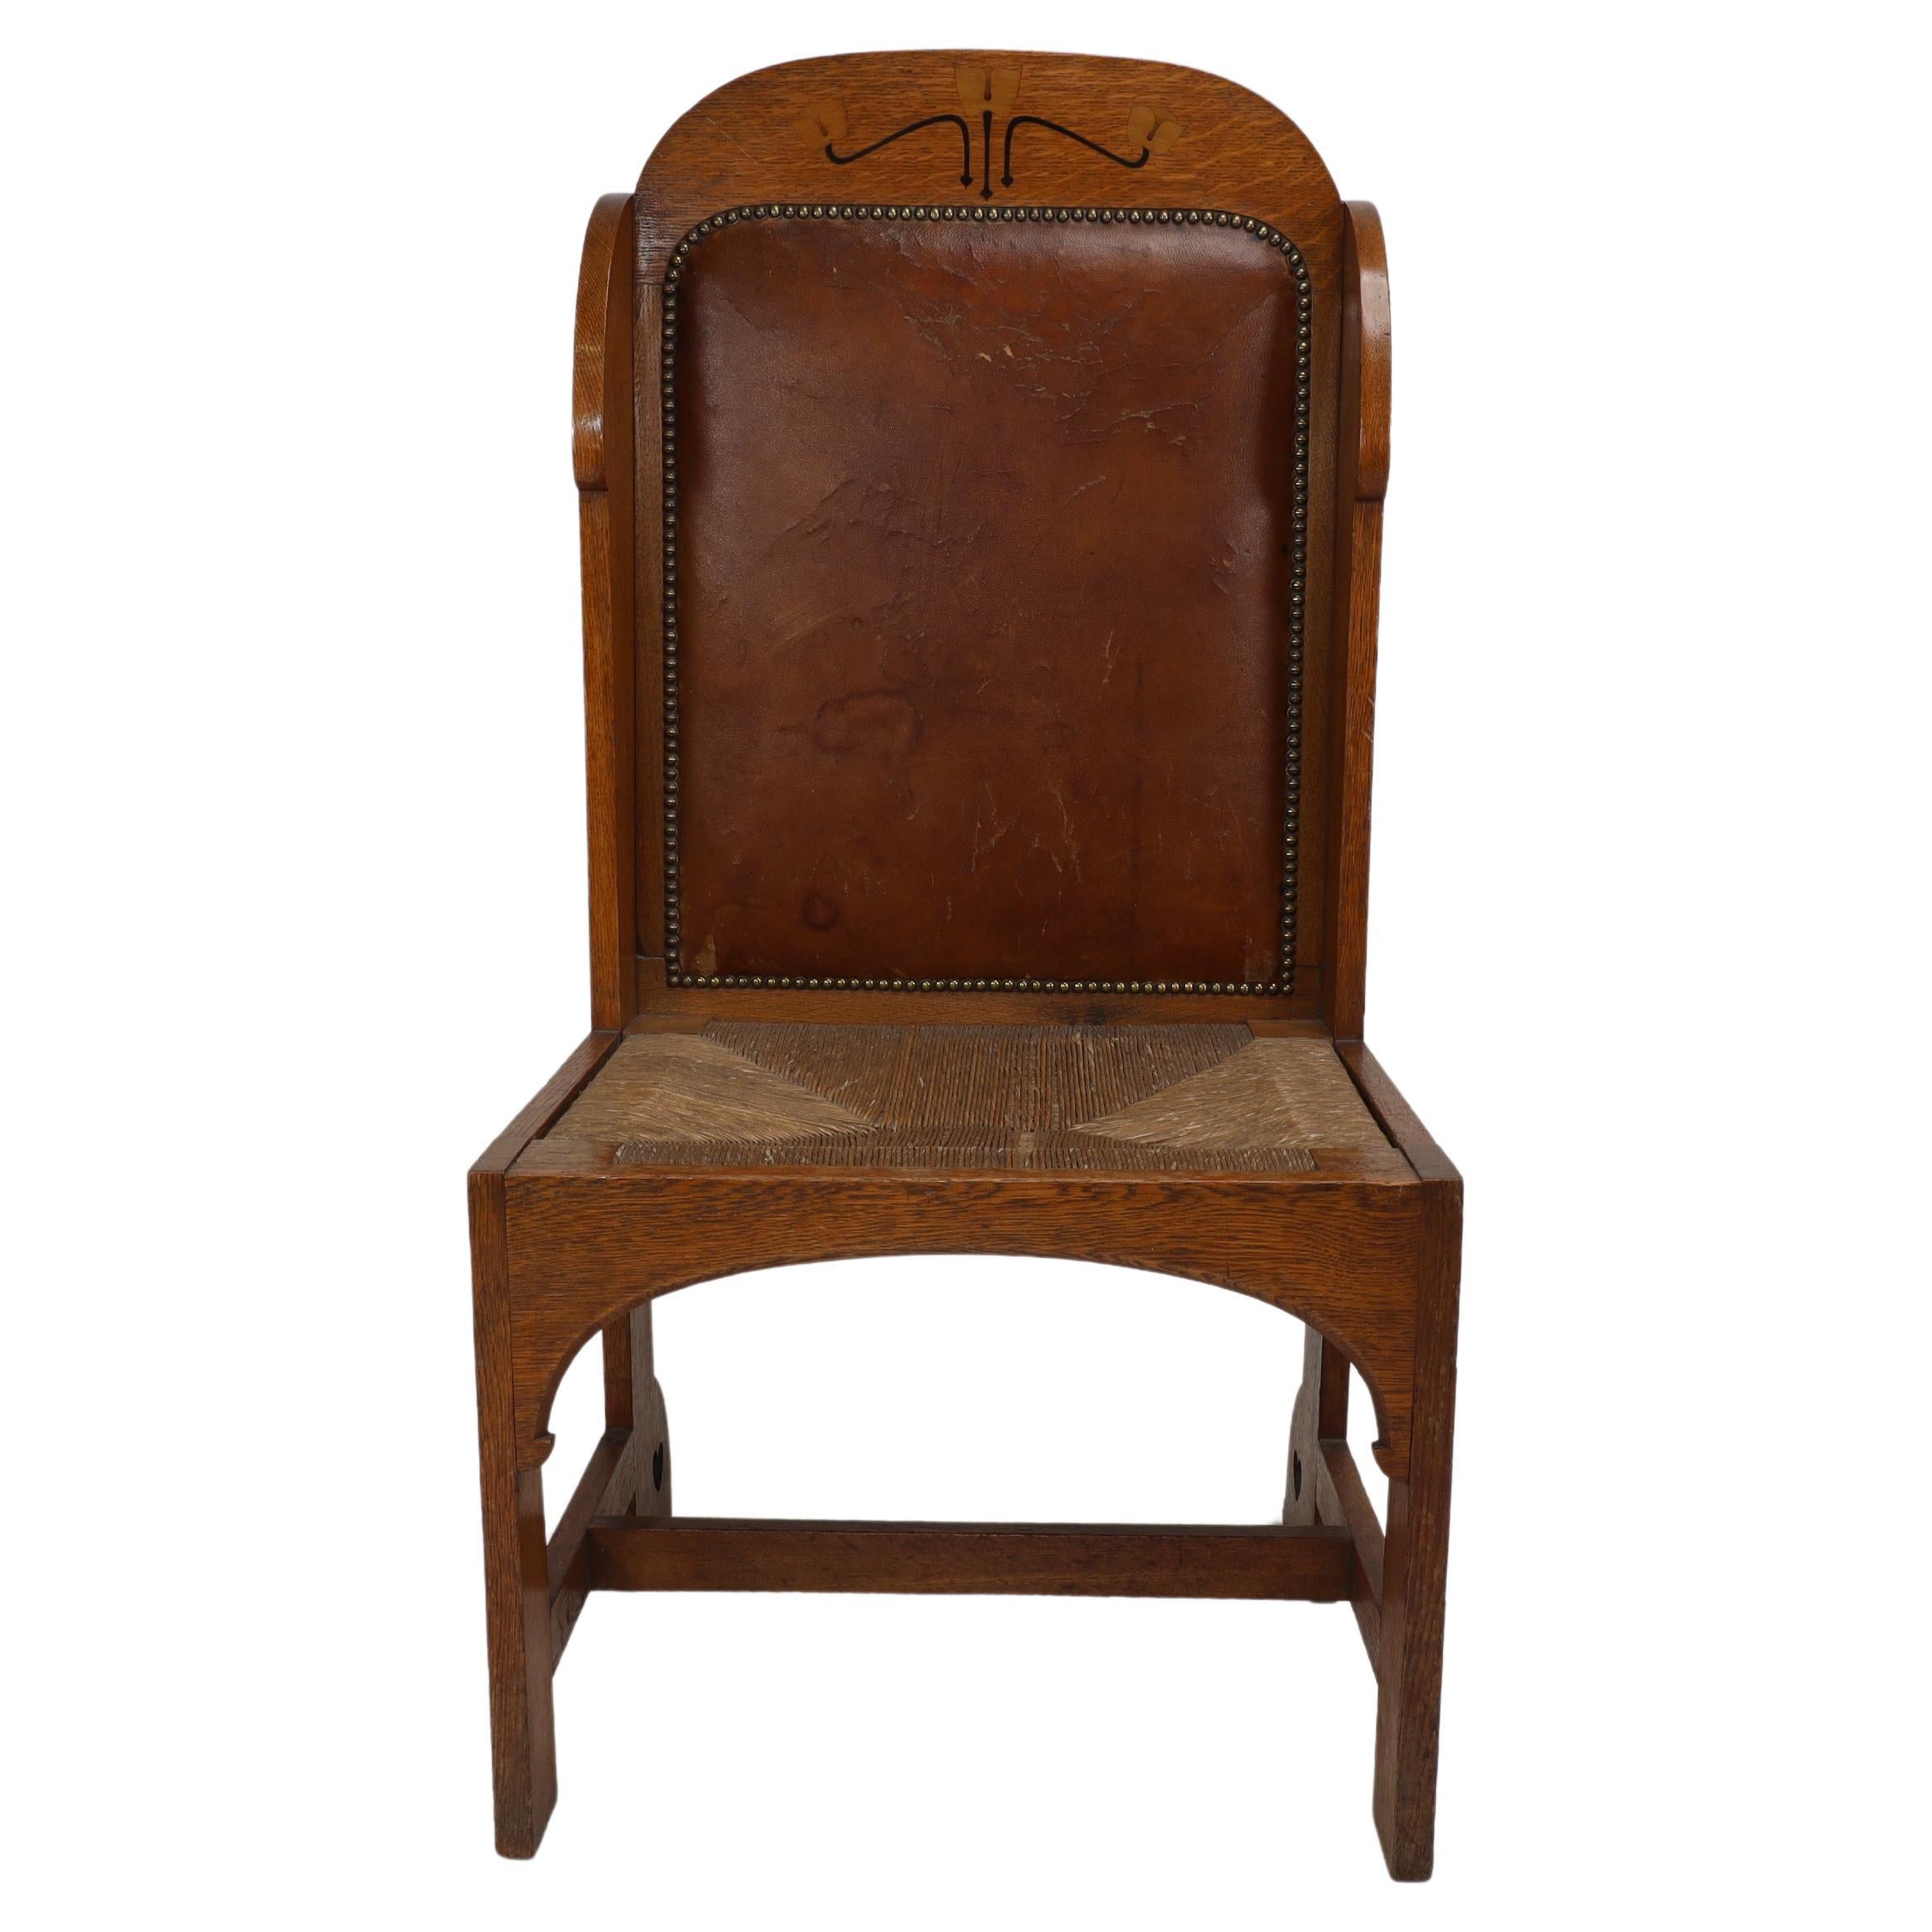 E G Punnet attributed. Probably made by William Birch. An oak wing back chair